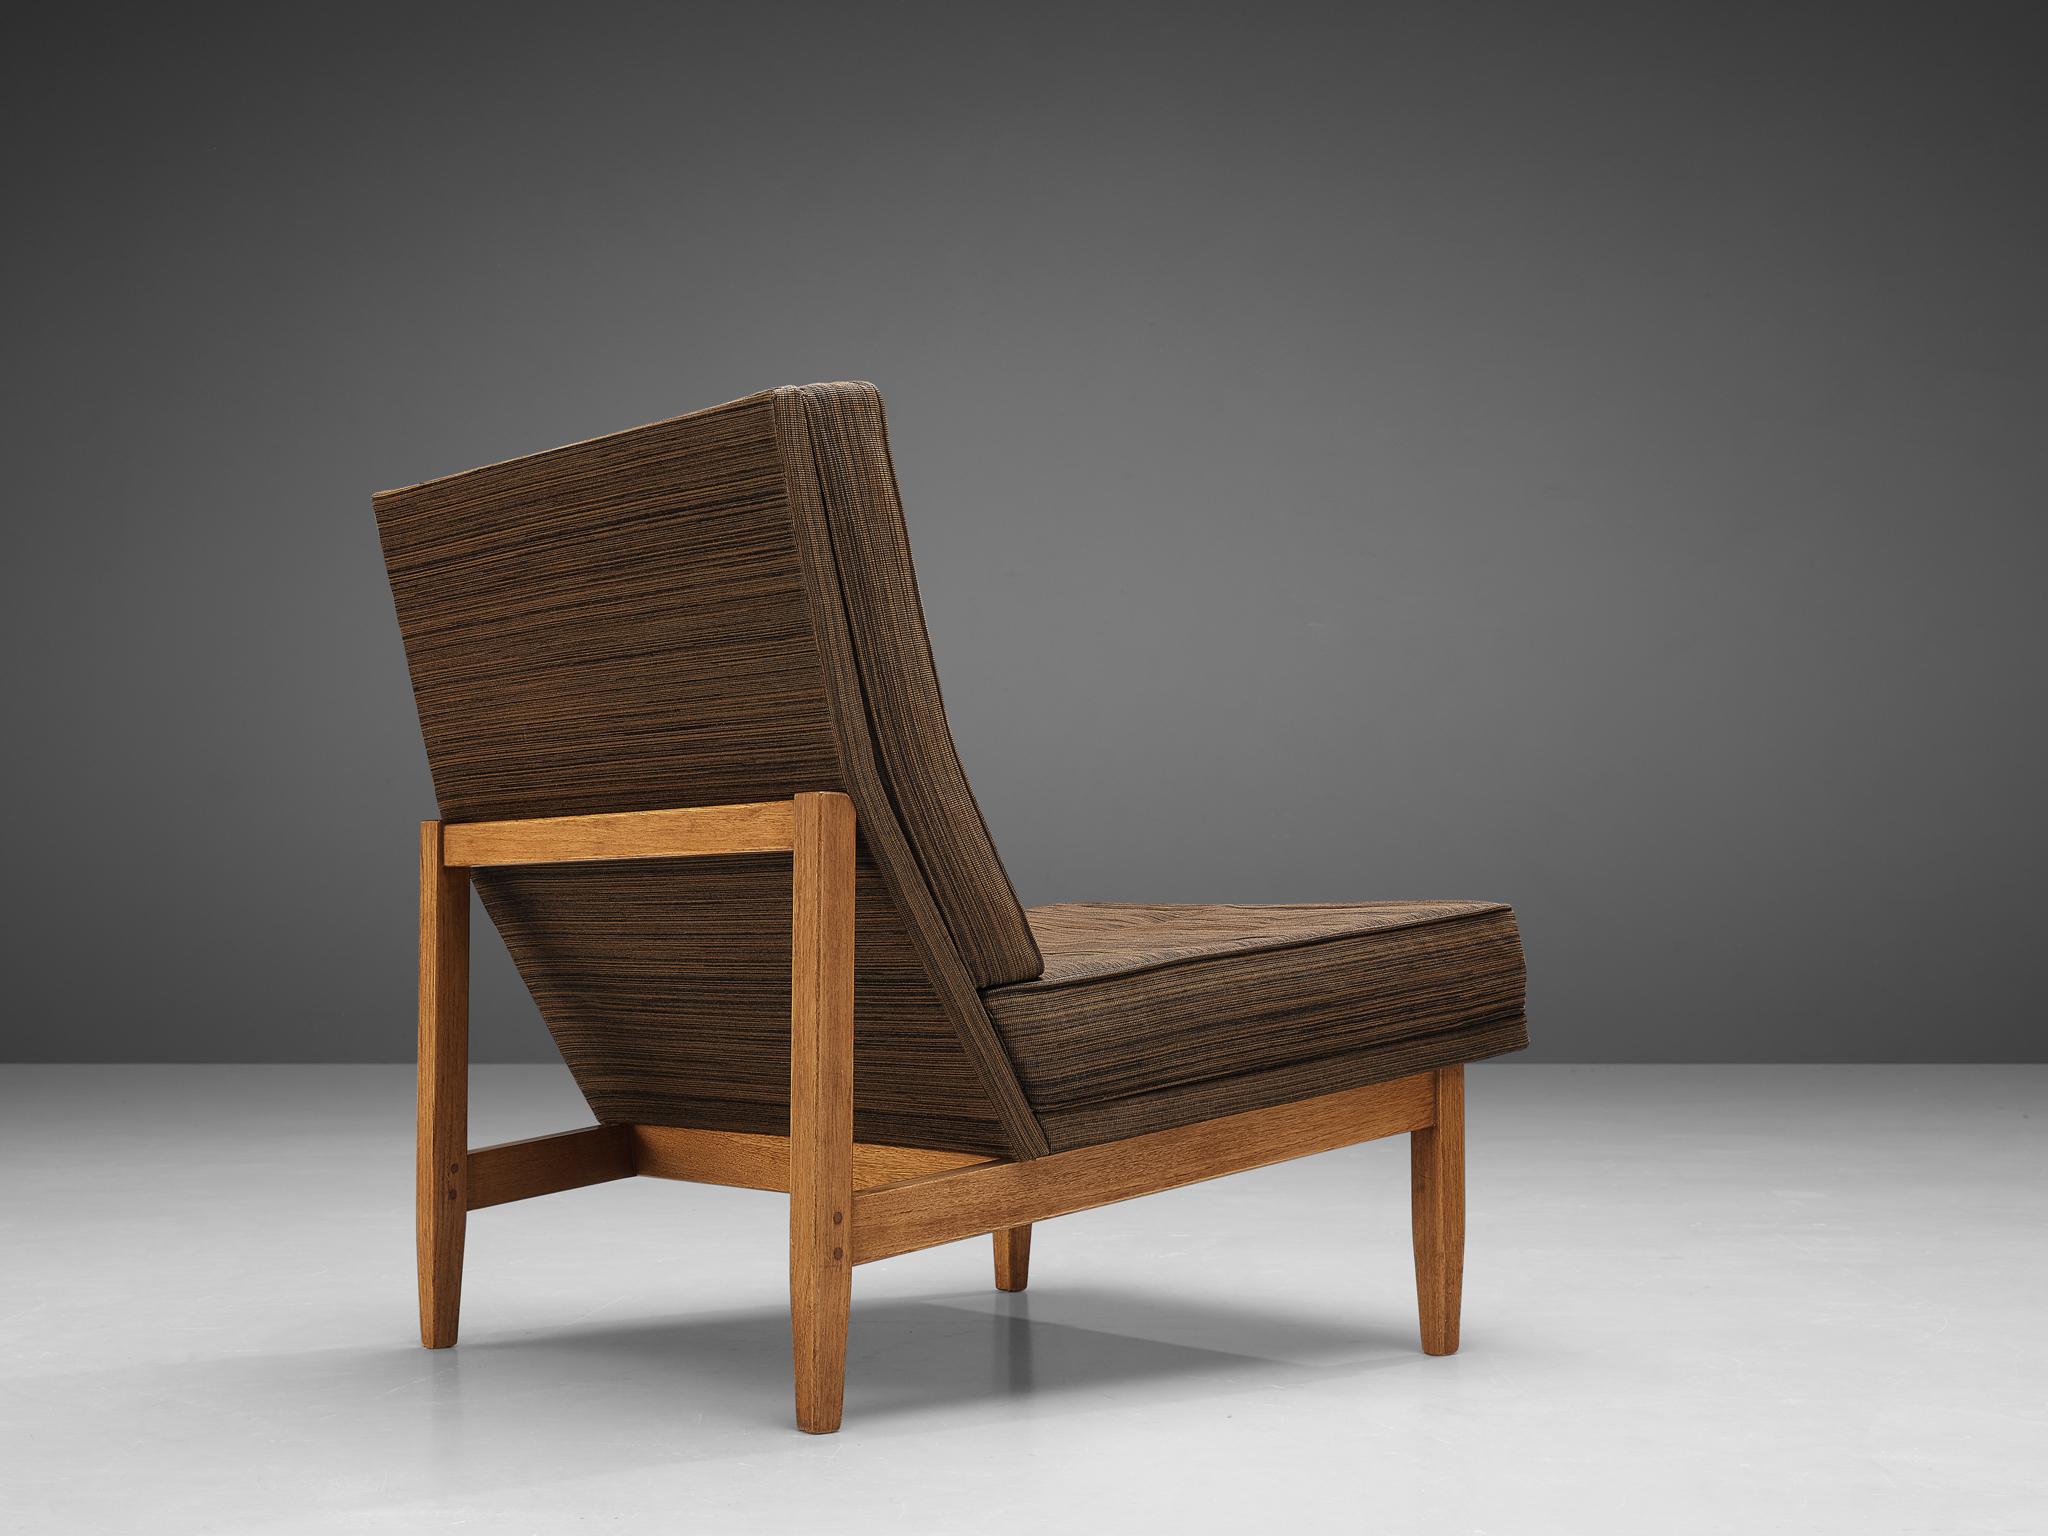 Florence Knoll for Knoll International, lounge chair, model '51', teak, fabric, United States, 1955

This slipper chair model 51 is designed by Florence Knoll. The teak frame of the chair is sleek in form. The angled seat is placed upon the